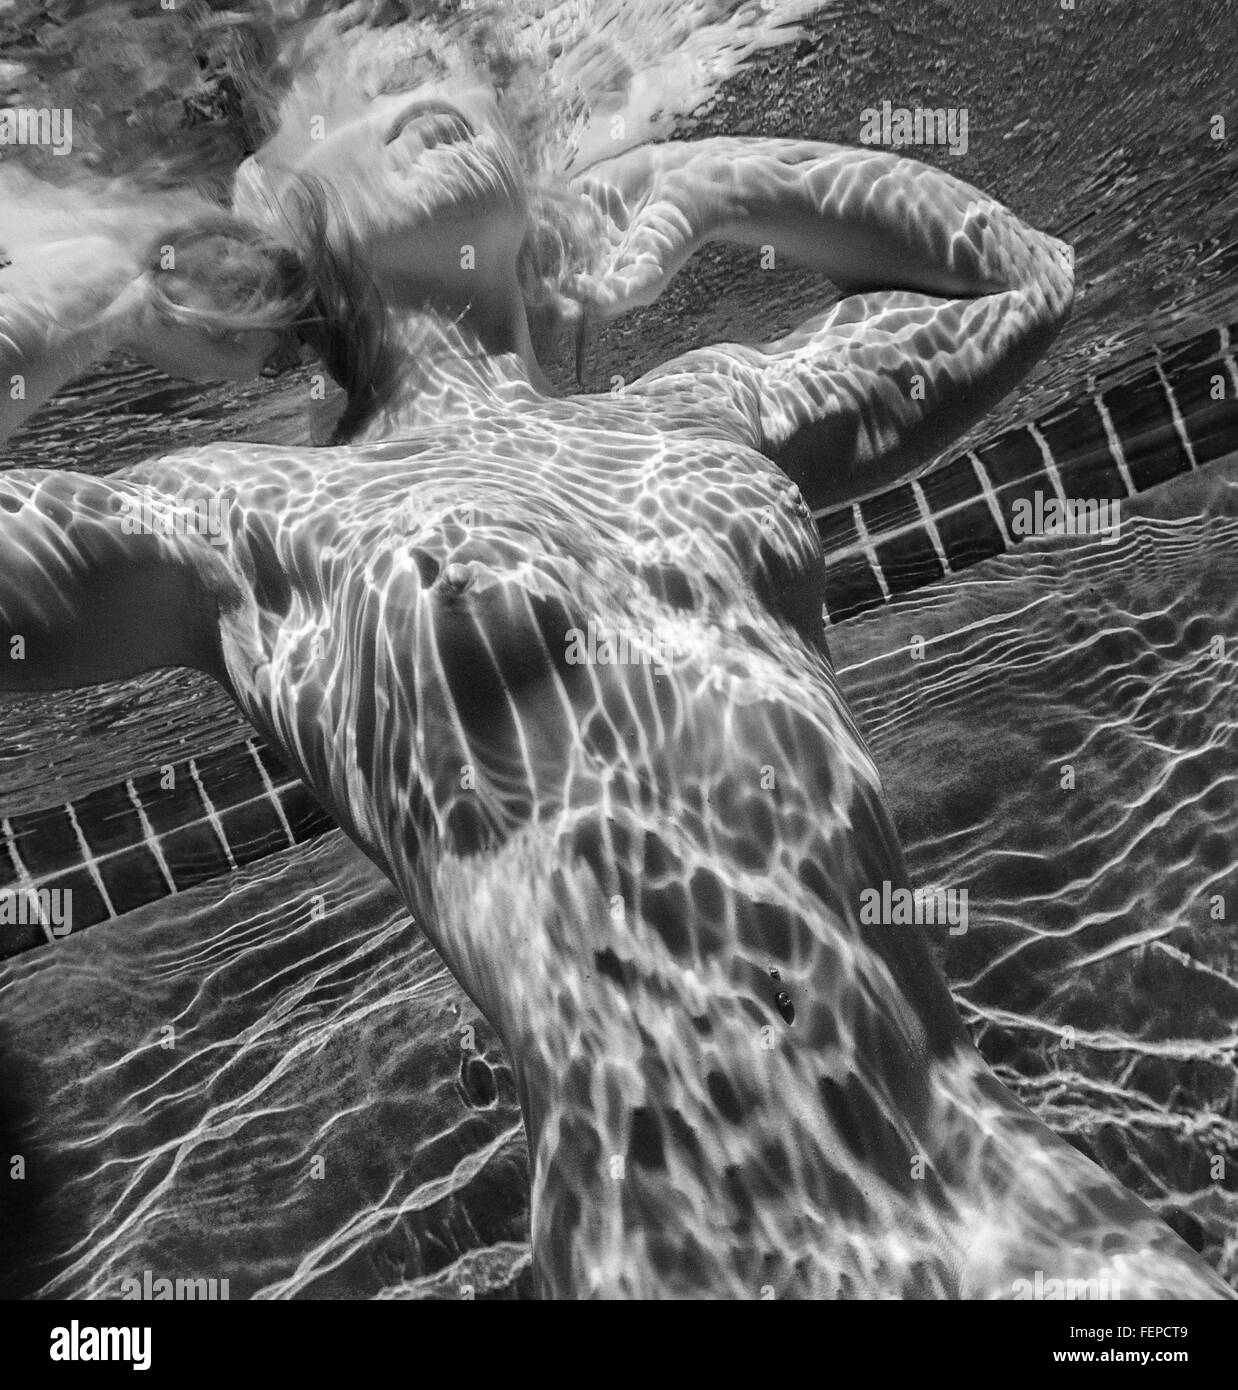 Woman swimming naked underwater Banque D'Images